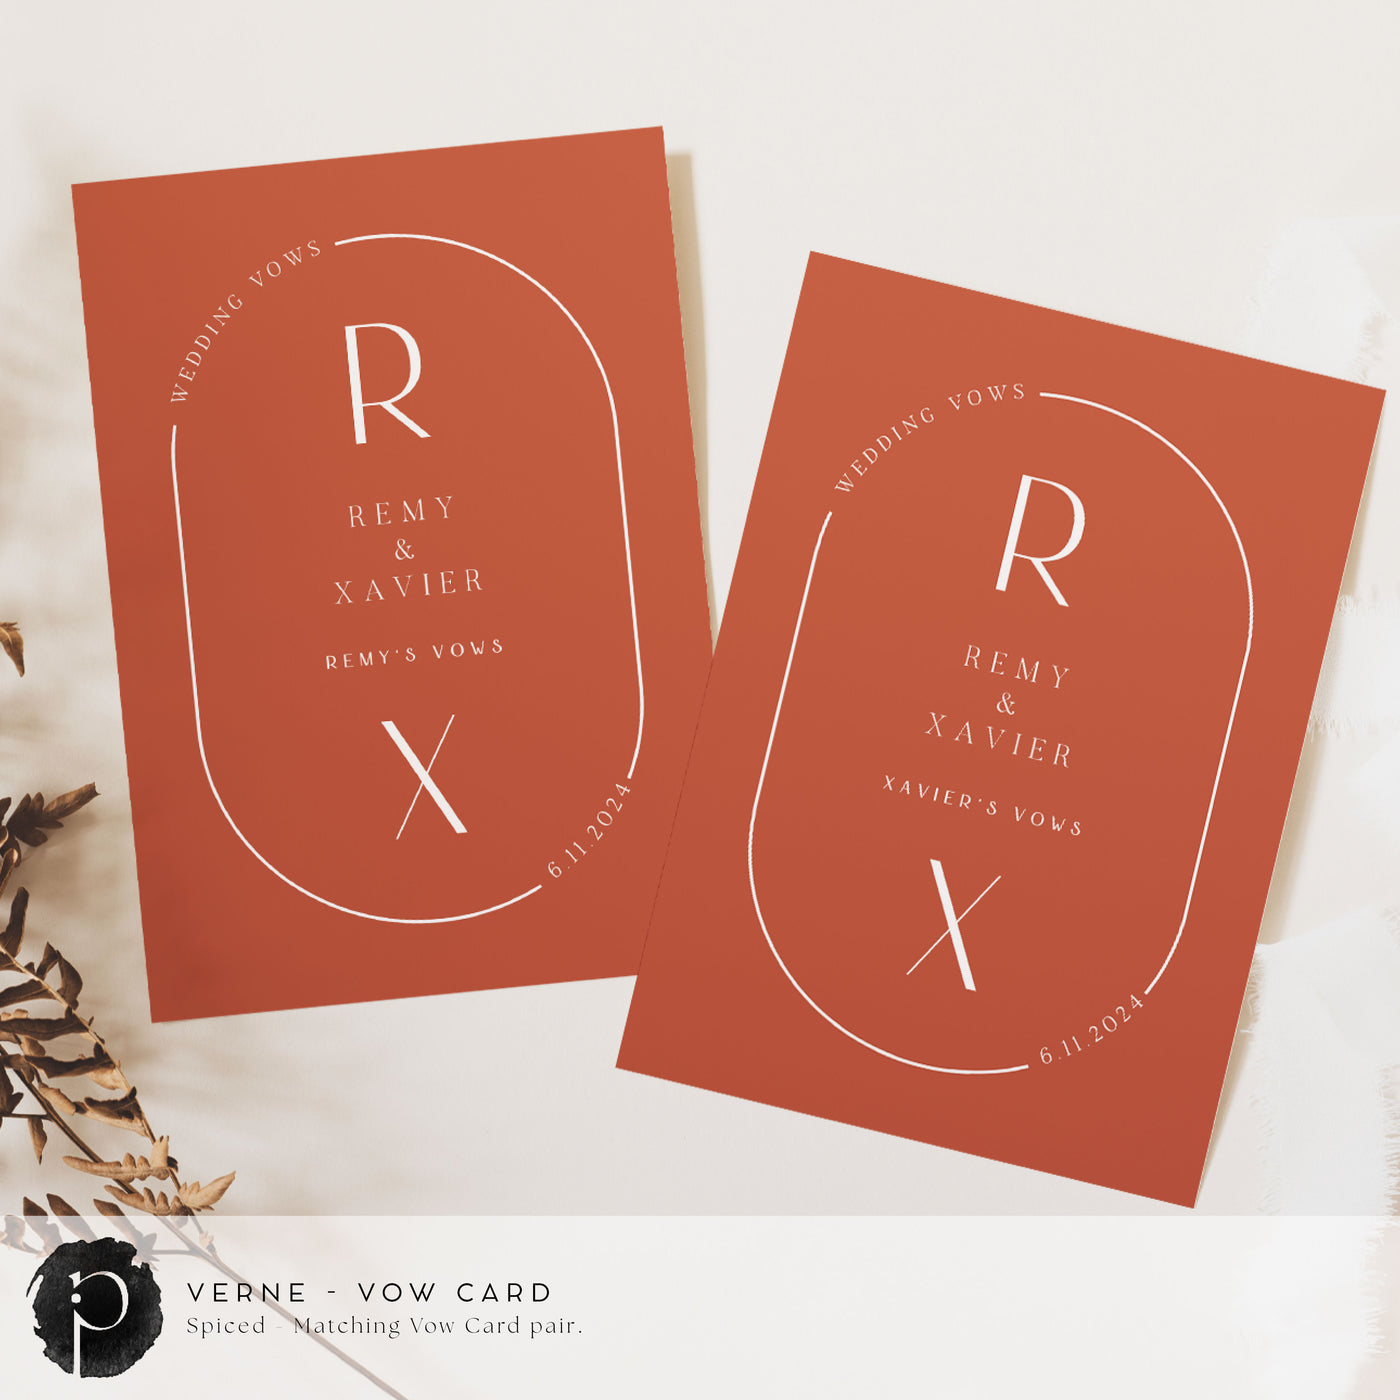 A pair of vow cards to write your wedding vows on in a modern midcentury wedding theme with white writing on a dark terracotta or clay or burnt orange background